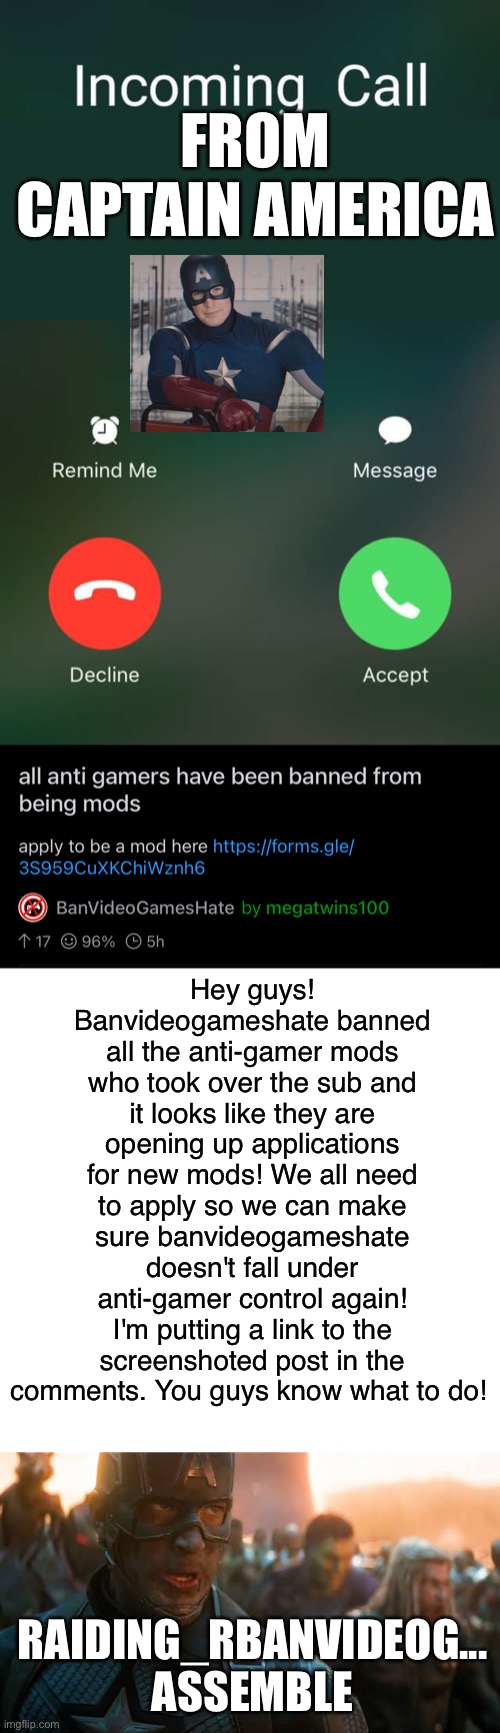 Nows out chance to take banvideogameshate back. Everyone here needs to apply so we can make sure it can be a gaming community fo | FROM CAPTAIN AMERICA; Hey guys! Banvideogameshate banned all the anti-gamer mods who took over the sub and it looks like they are opening up applications for new mods! We all need to apply so we can make sure banvideogameshate doesn't fall under anti-gamer control again! I'm putting a link to the screenshoted post in the comments. You guys know what to do! RAIDING_RBANVIDEOG... ASSEMBLE | image tagged in incoming call,avengers assemble | made w/ Imgflip meme maker